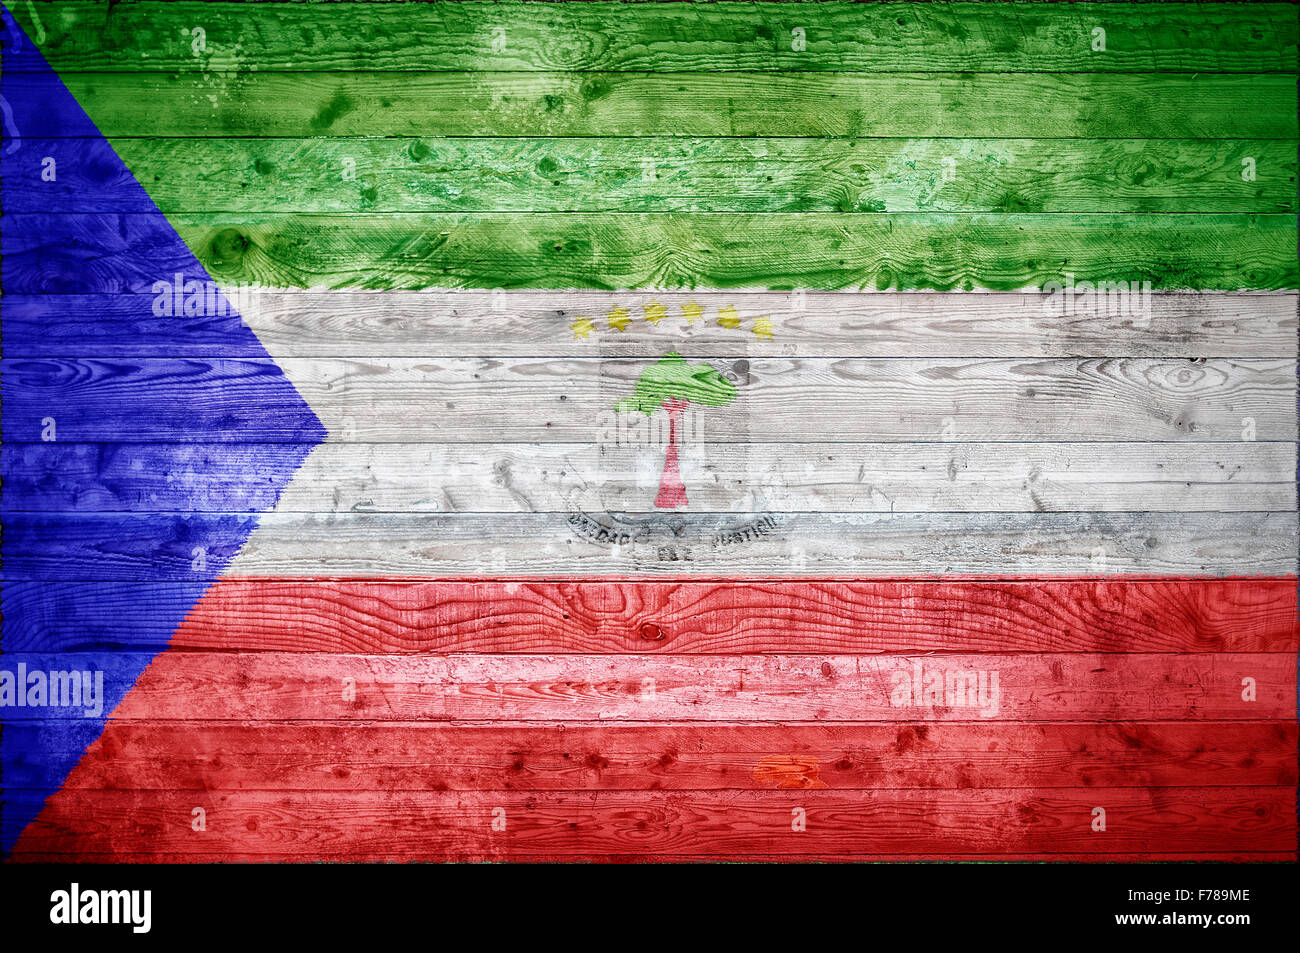 A vignetted background image of the flag of Equatorial Guinea painted onto wooden boards of a wall or floor. Stock Photo